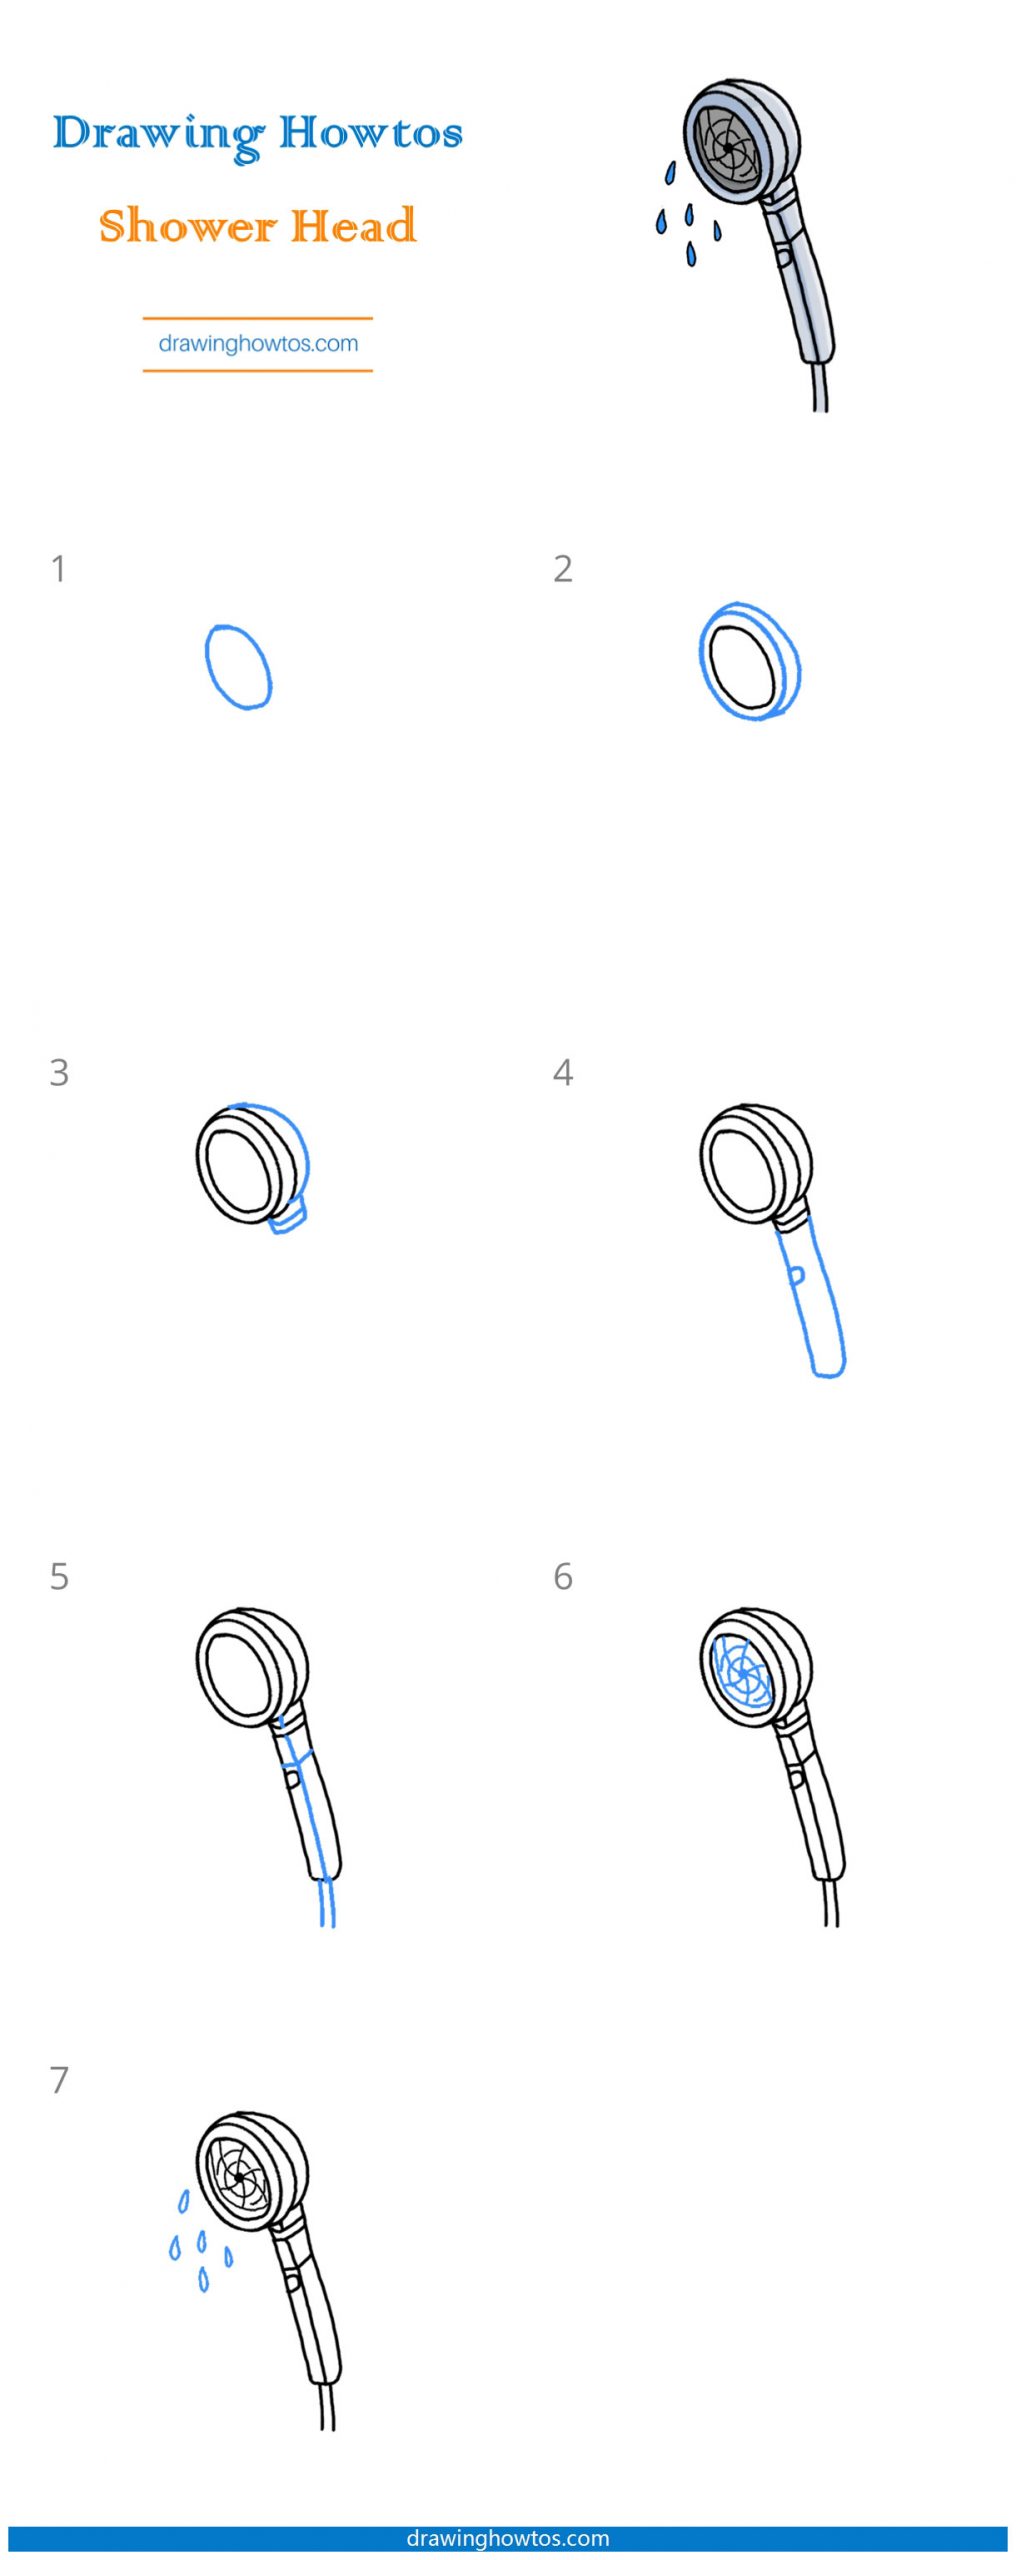 How to Draw a Handheld Shower Head Step by Step